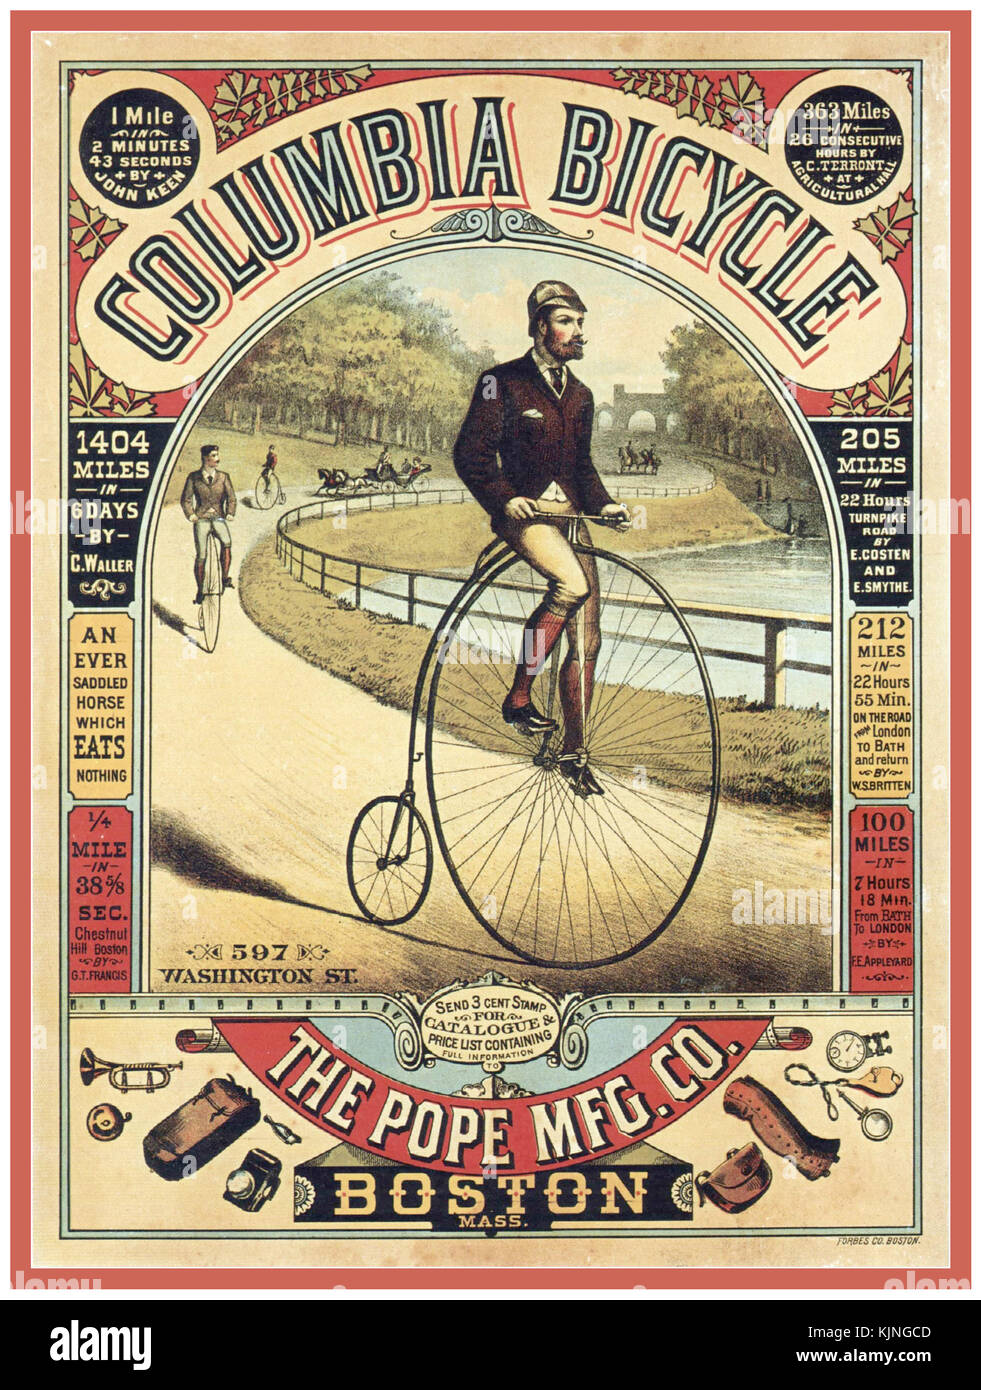 Historique années 1800, Penny Farthing LOCATION BOSTON USA VINTAGE ADVERTISING POSTER RETRO Banque D'Images